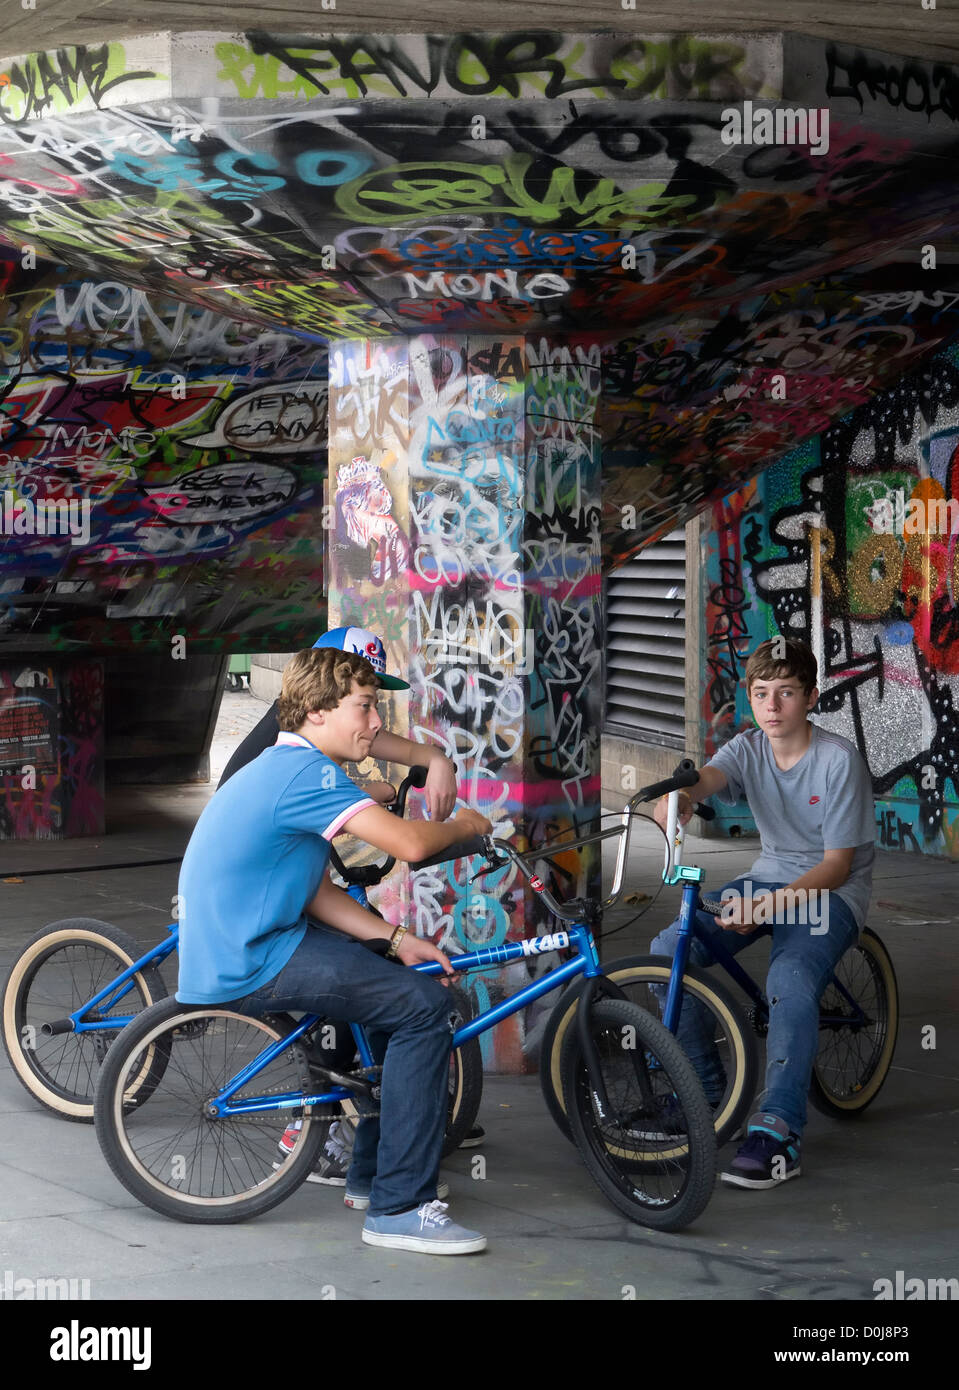 Three cyclists at graffiti-land on the South Bank in London. Stock Photo